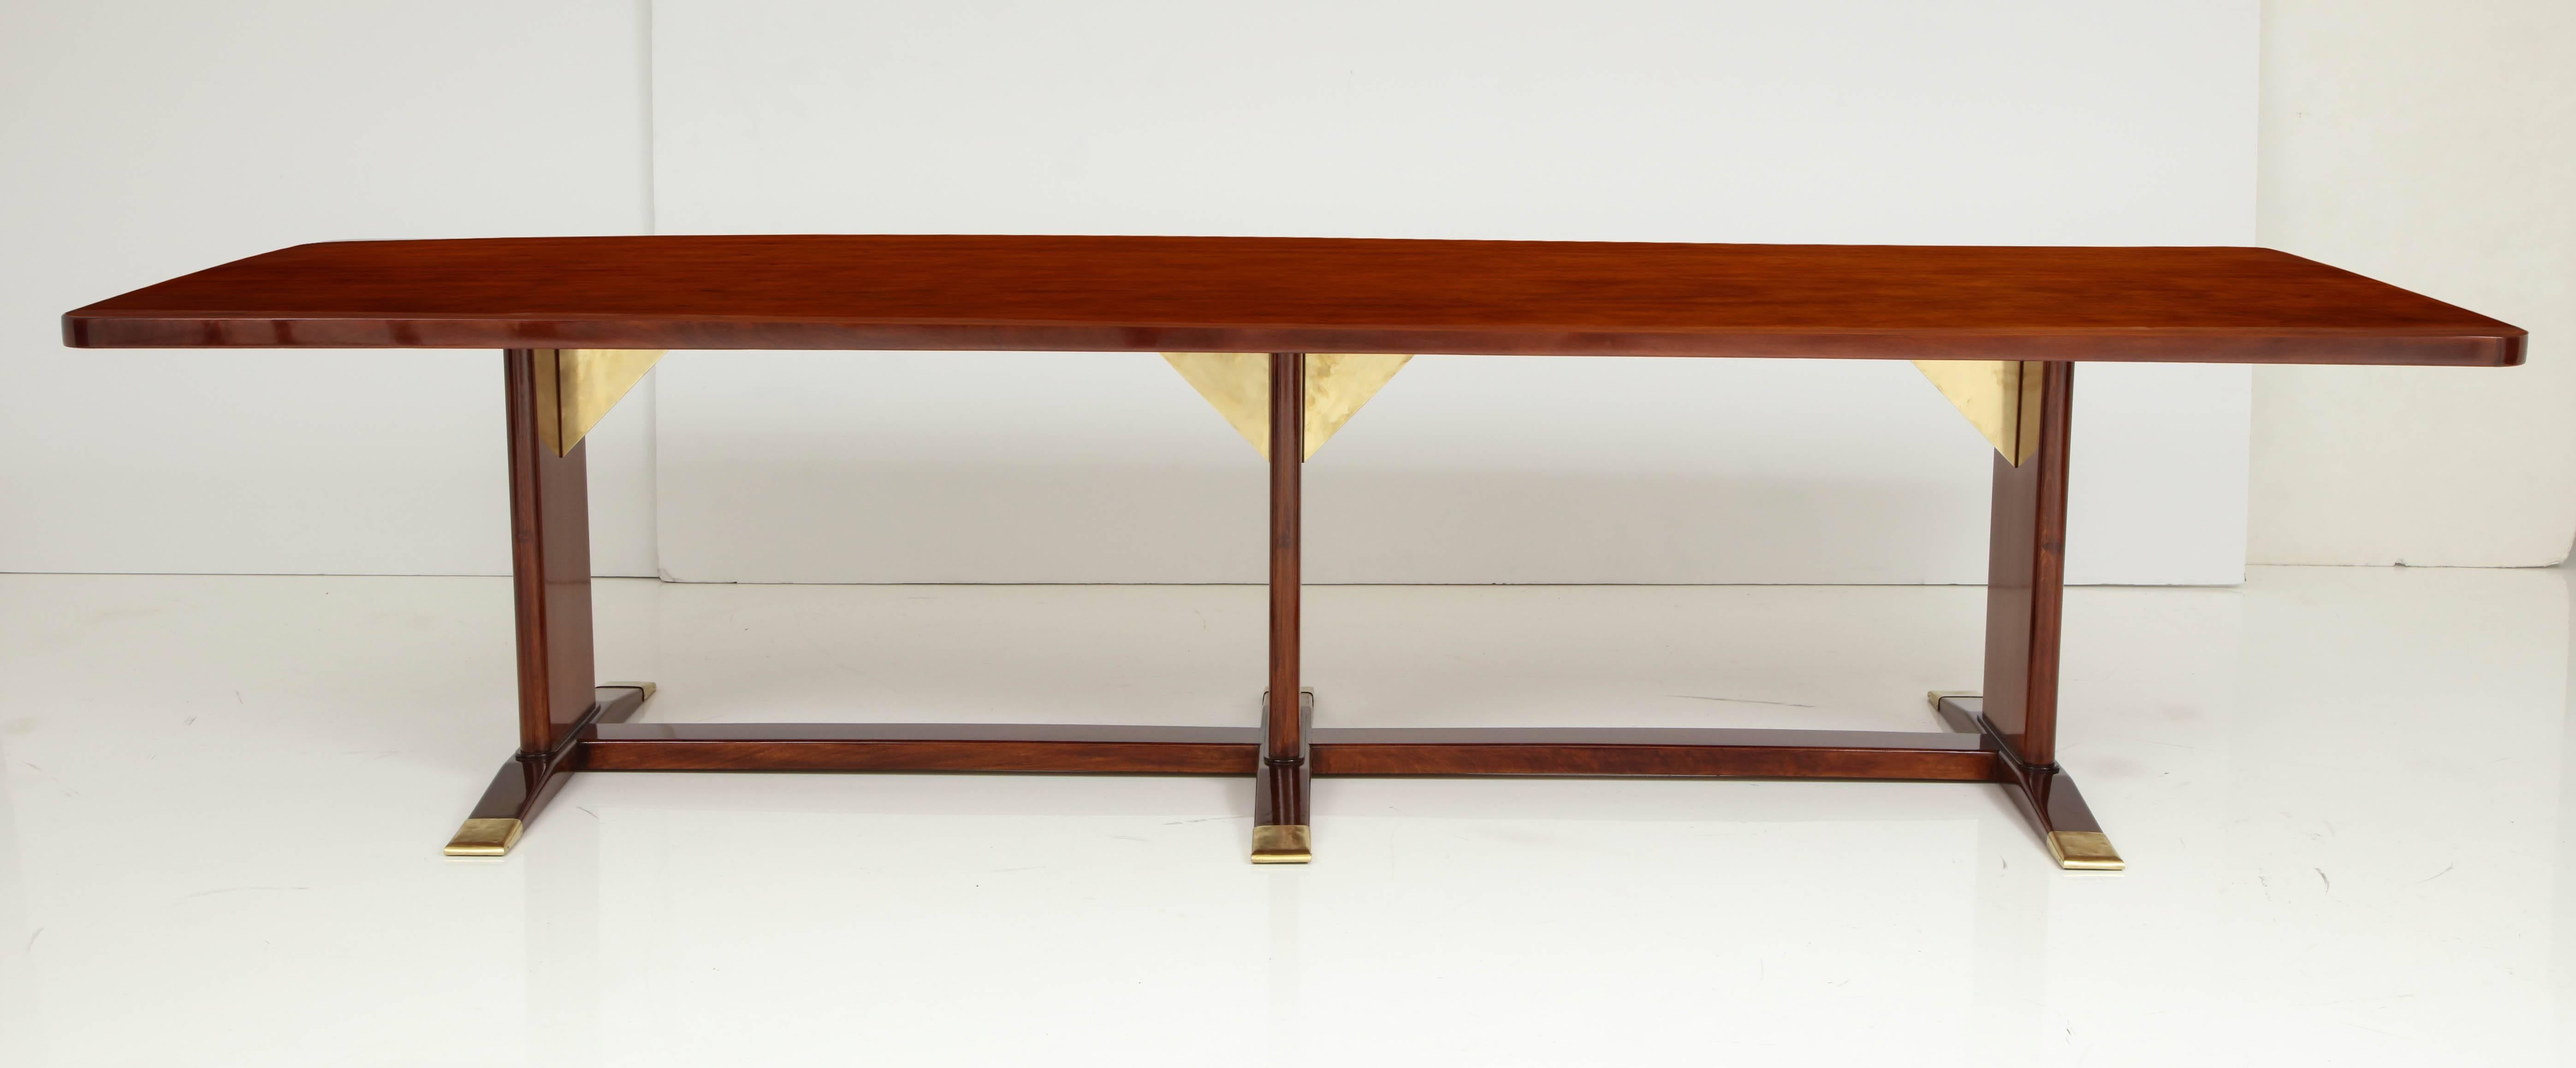 An impressive Frits Henningsen mahogany and brass-mounted table, circa 1940s, the rectangular top with rounded corners raised on three solid supports with brass triangular brackets, with tapered feet ending with conforming brass caps.
Probably a